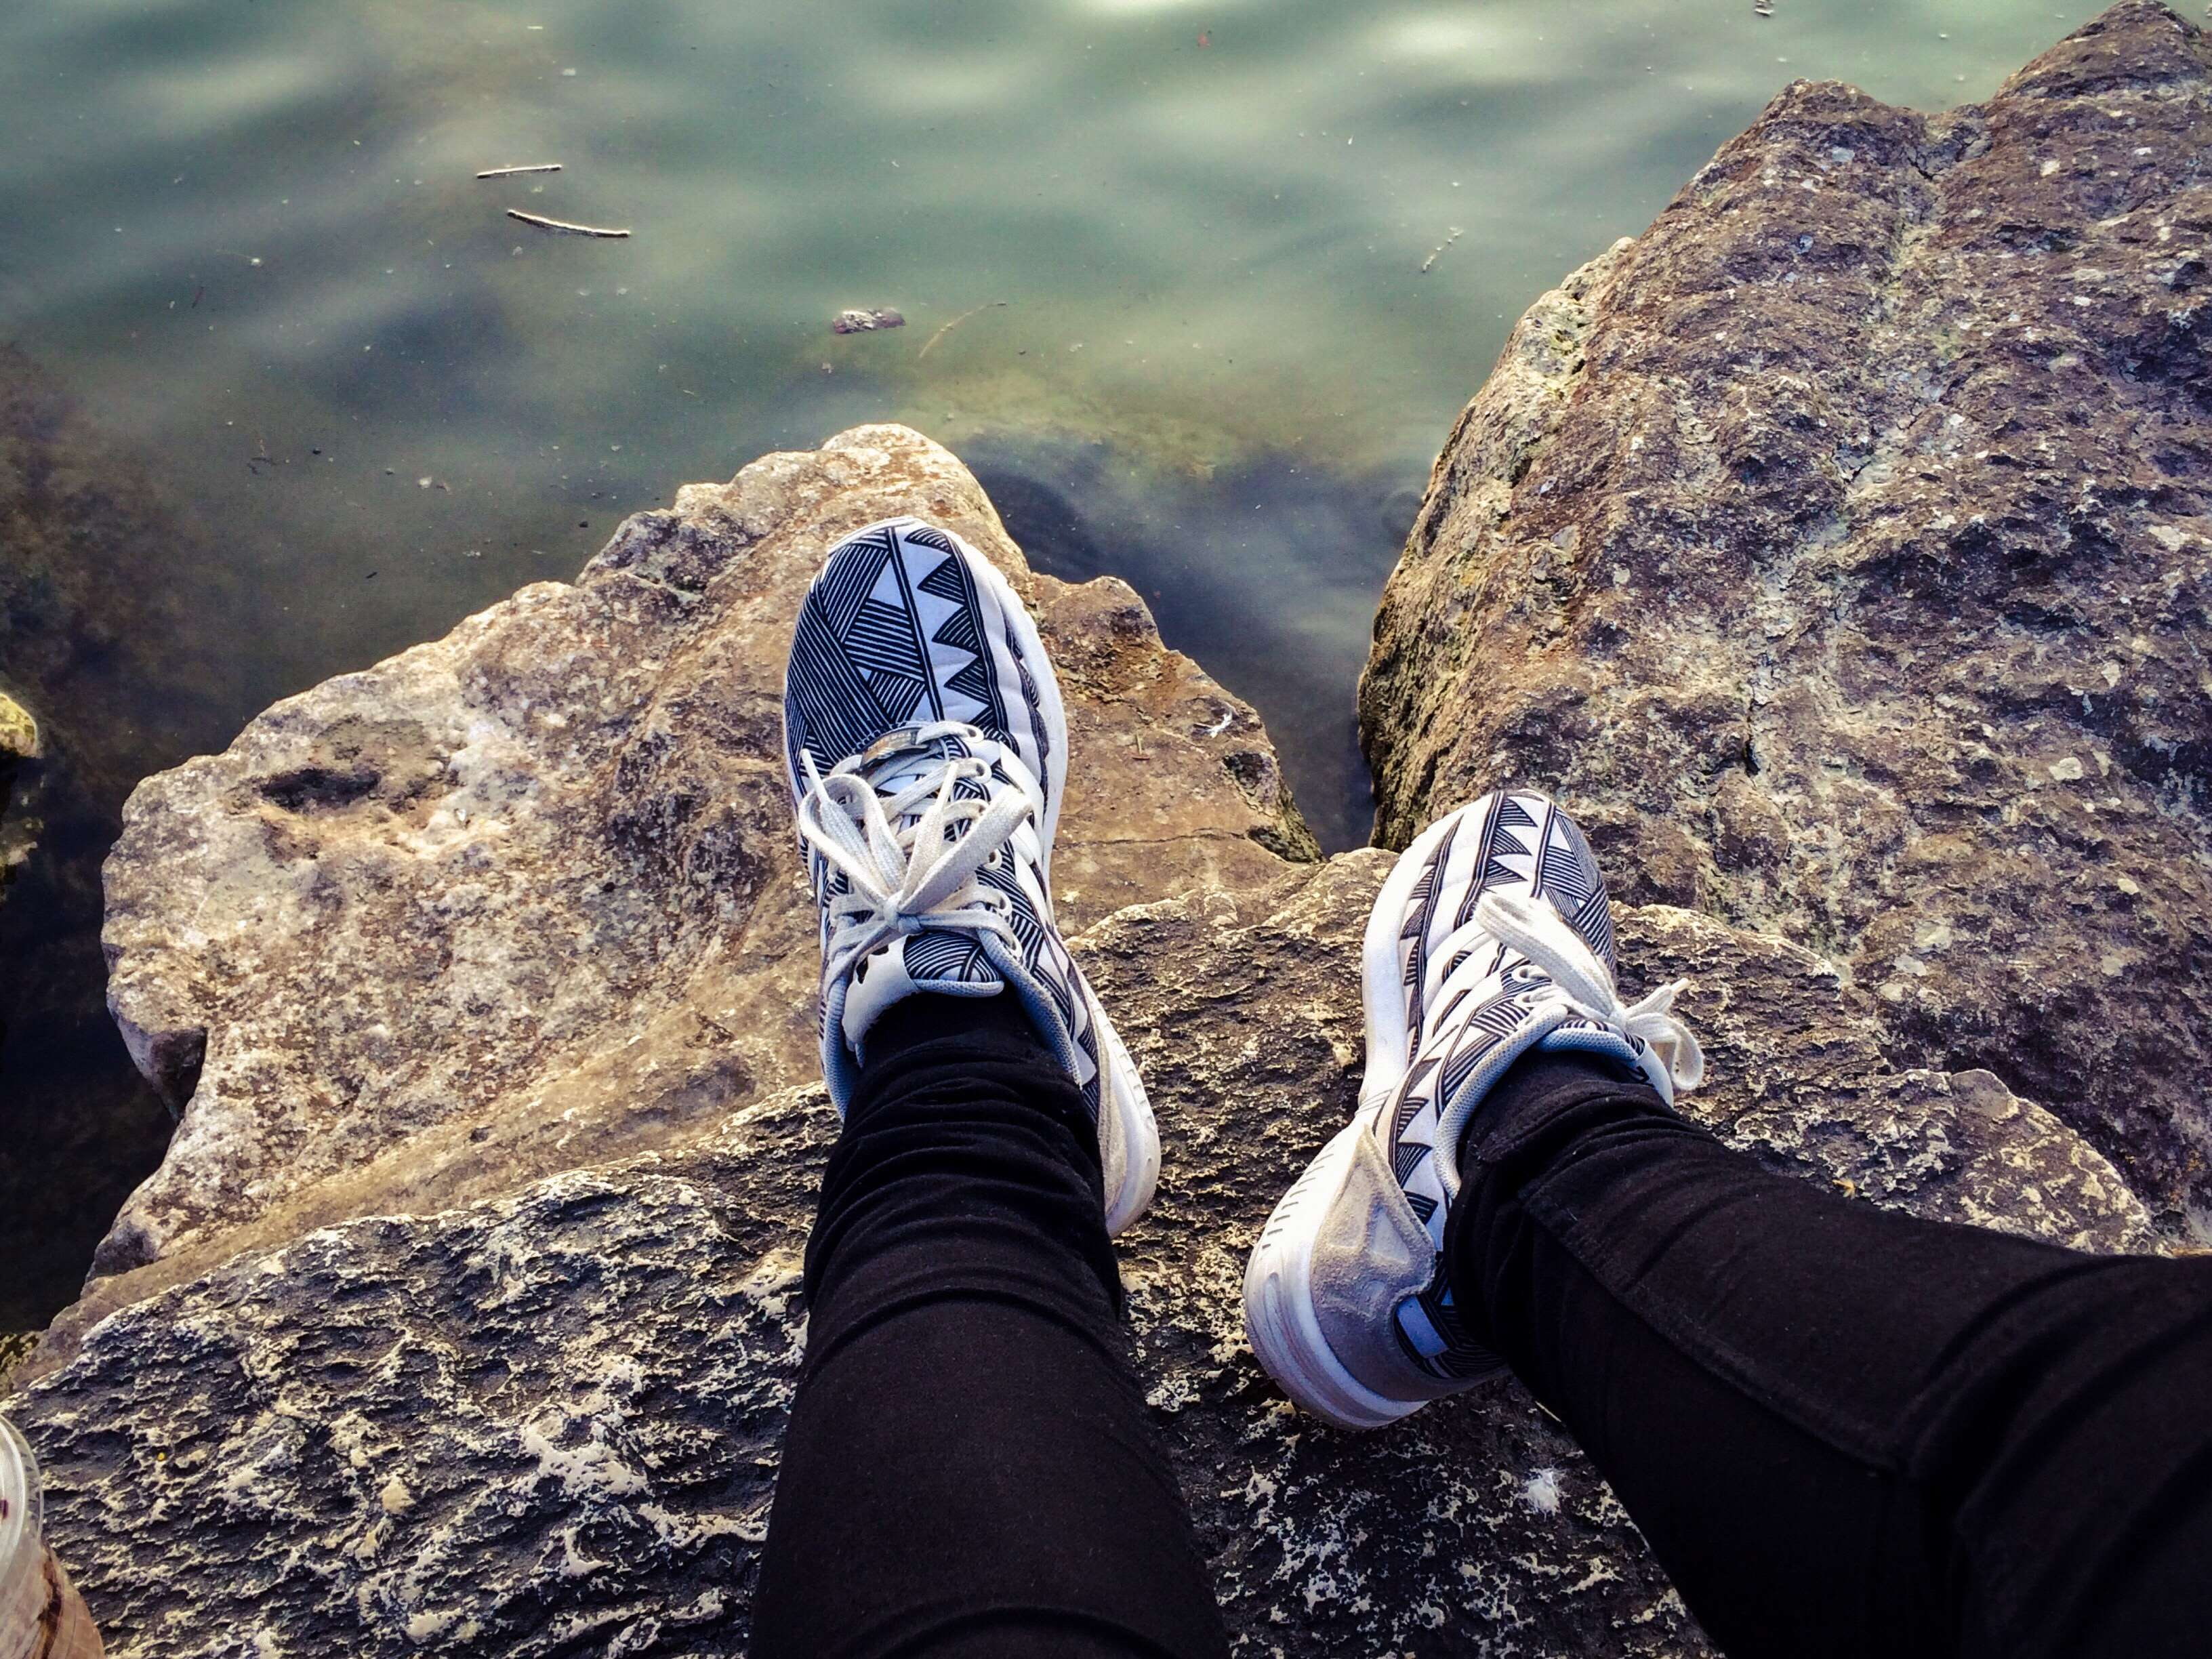 lake, shoes, water, low section, human leg, personal perspective